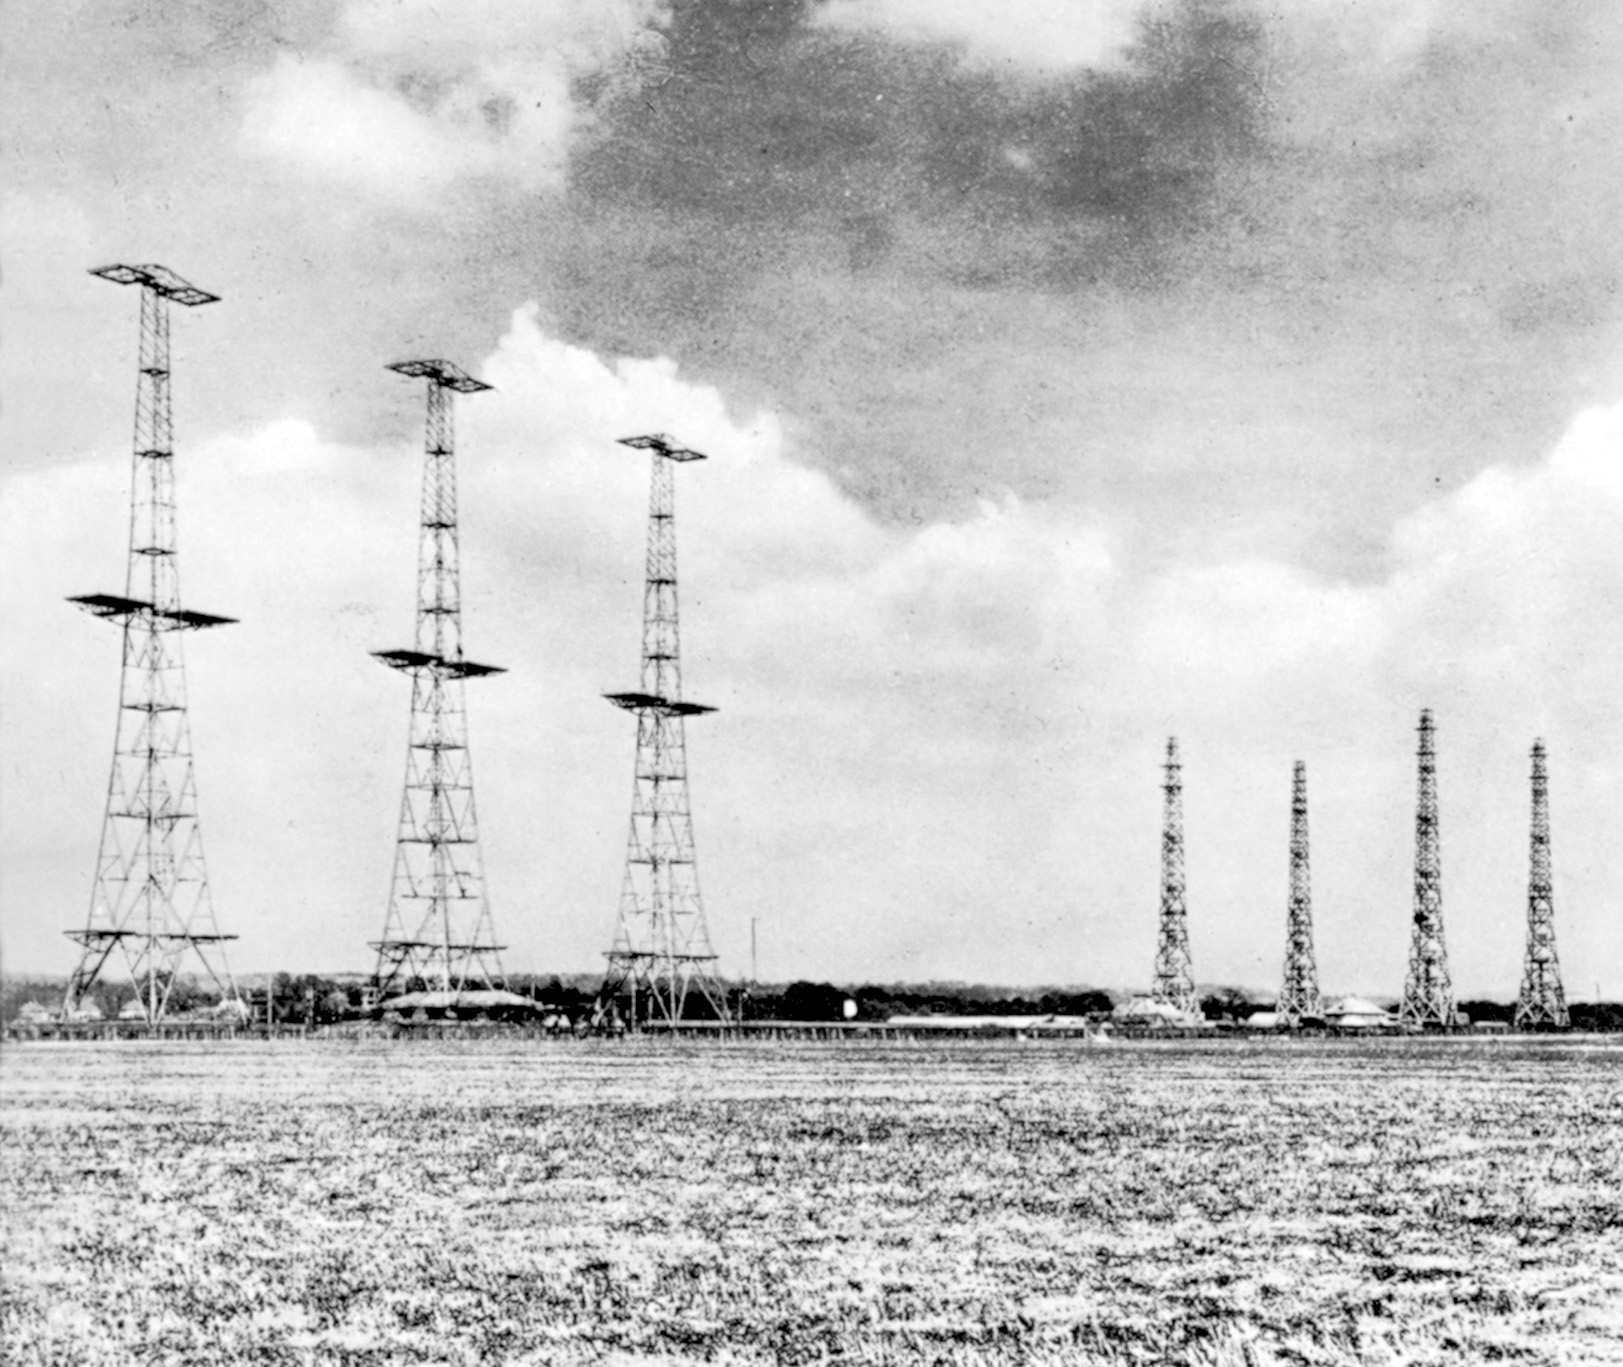 Like ungainly monsters, these radar masts rise to protect Britain. They could detect bombers assembling over France and alert RAF forces.